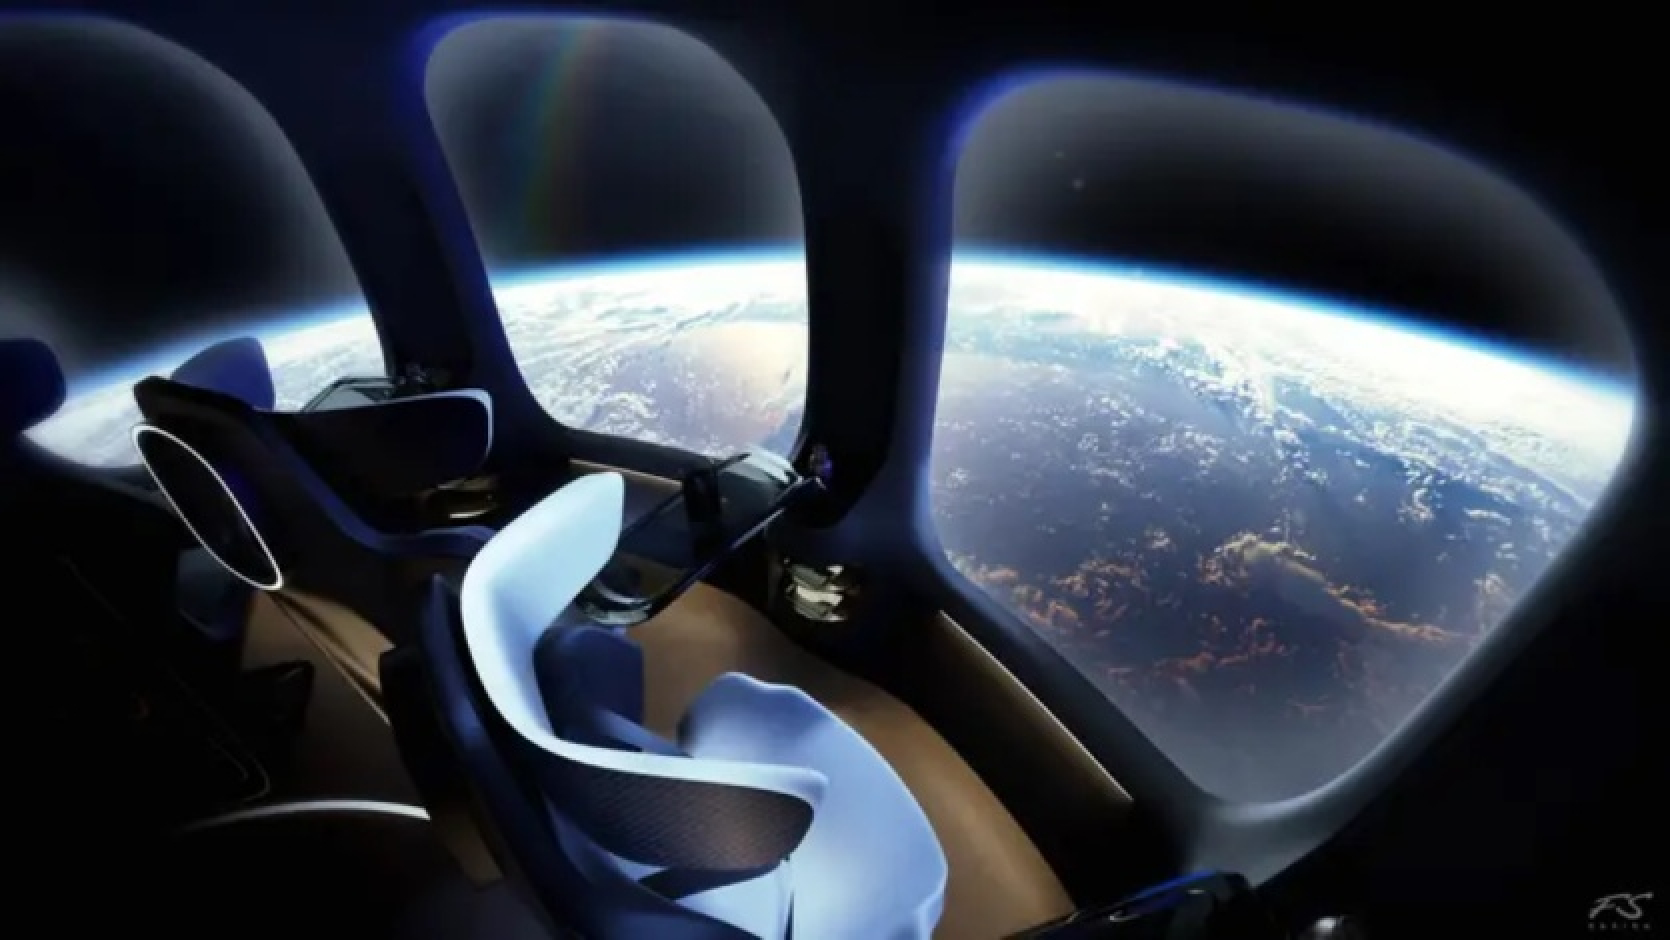 Ferrari's designer was here - Halo Space showed the interior of a capsule that will "take" you to the stratosphere for $150k.